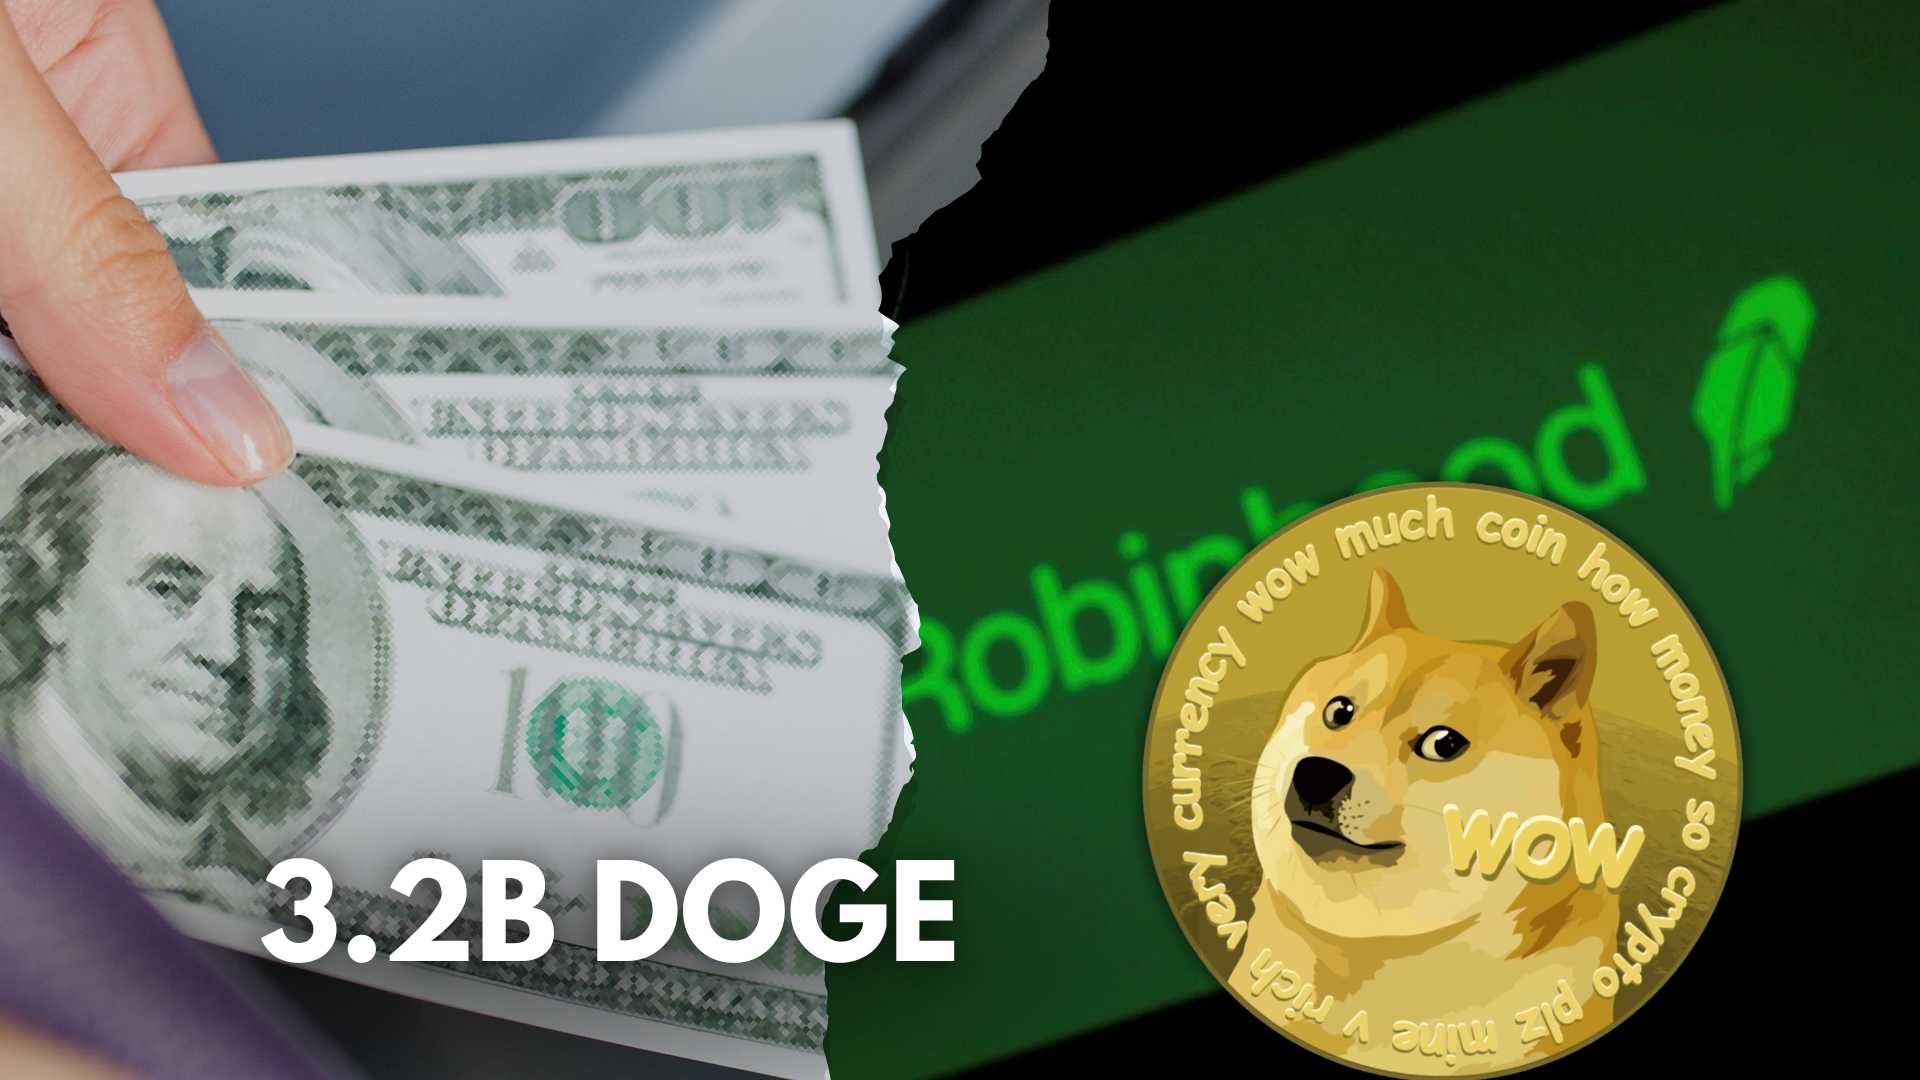 Following the Withdrawal of 3.2B DOGE, Robinhood's Dogecoin Reserve Decreases